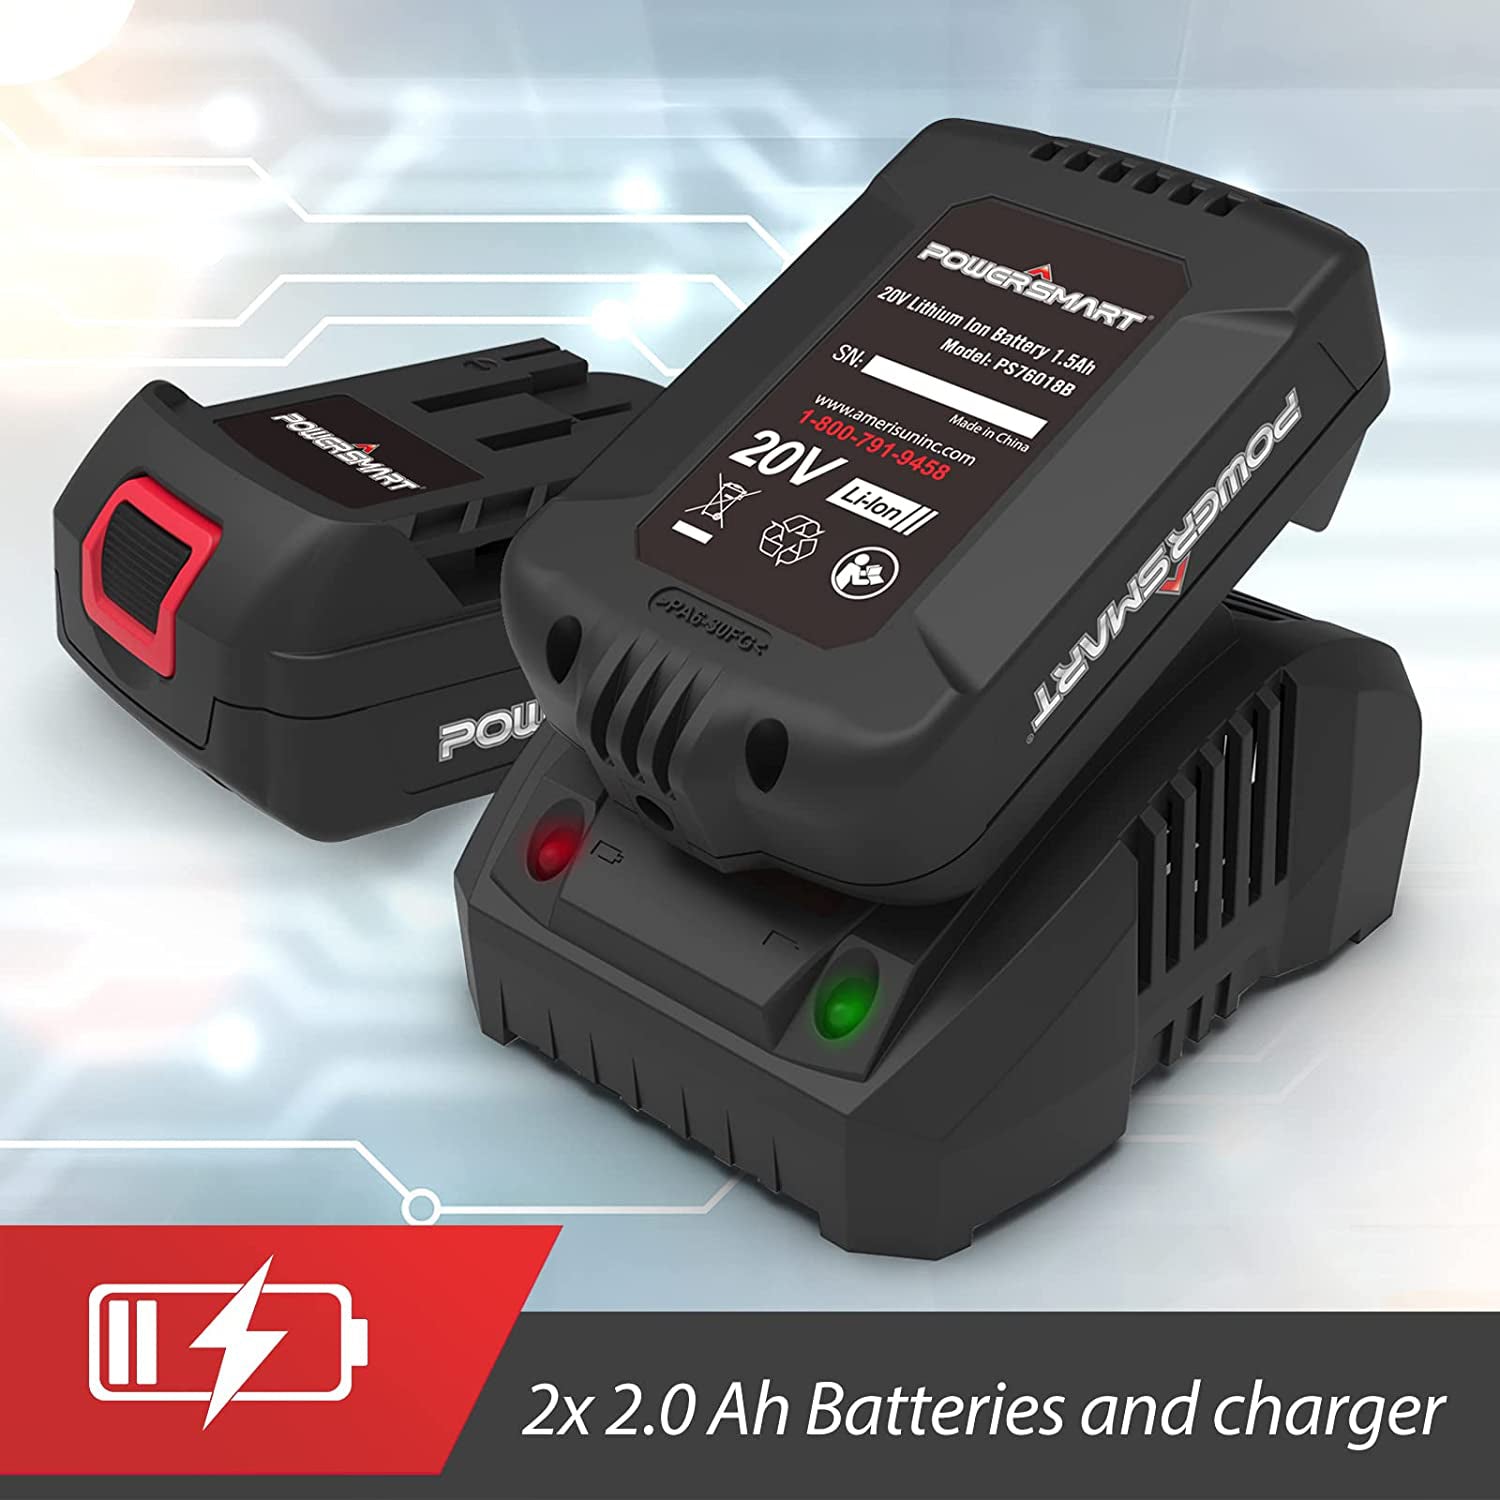 20V Lithium Battery Charger: Fit All 20V Battery Tools of PowerSmart F